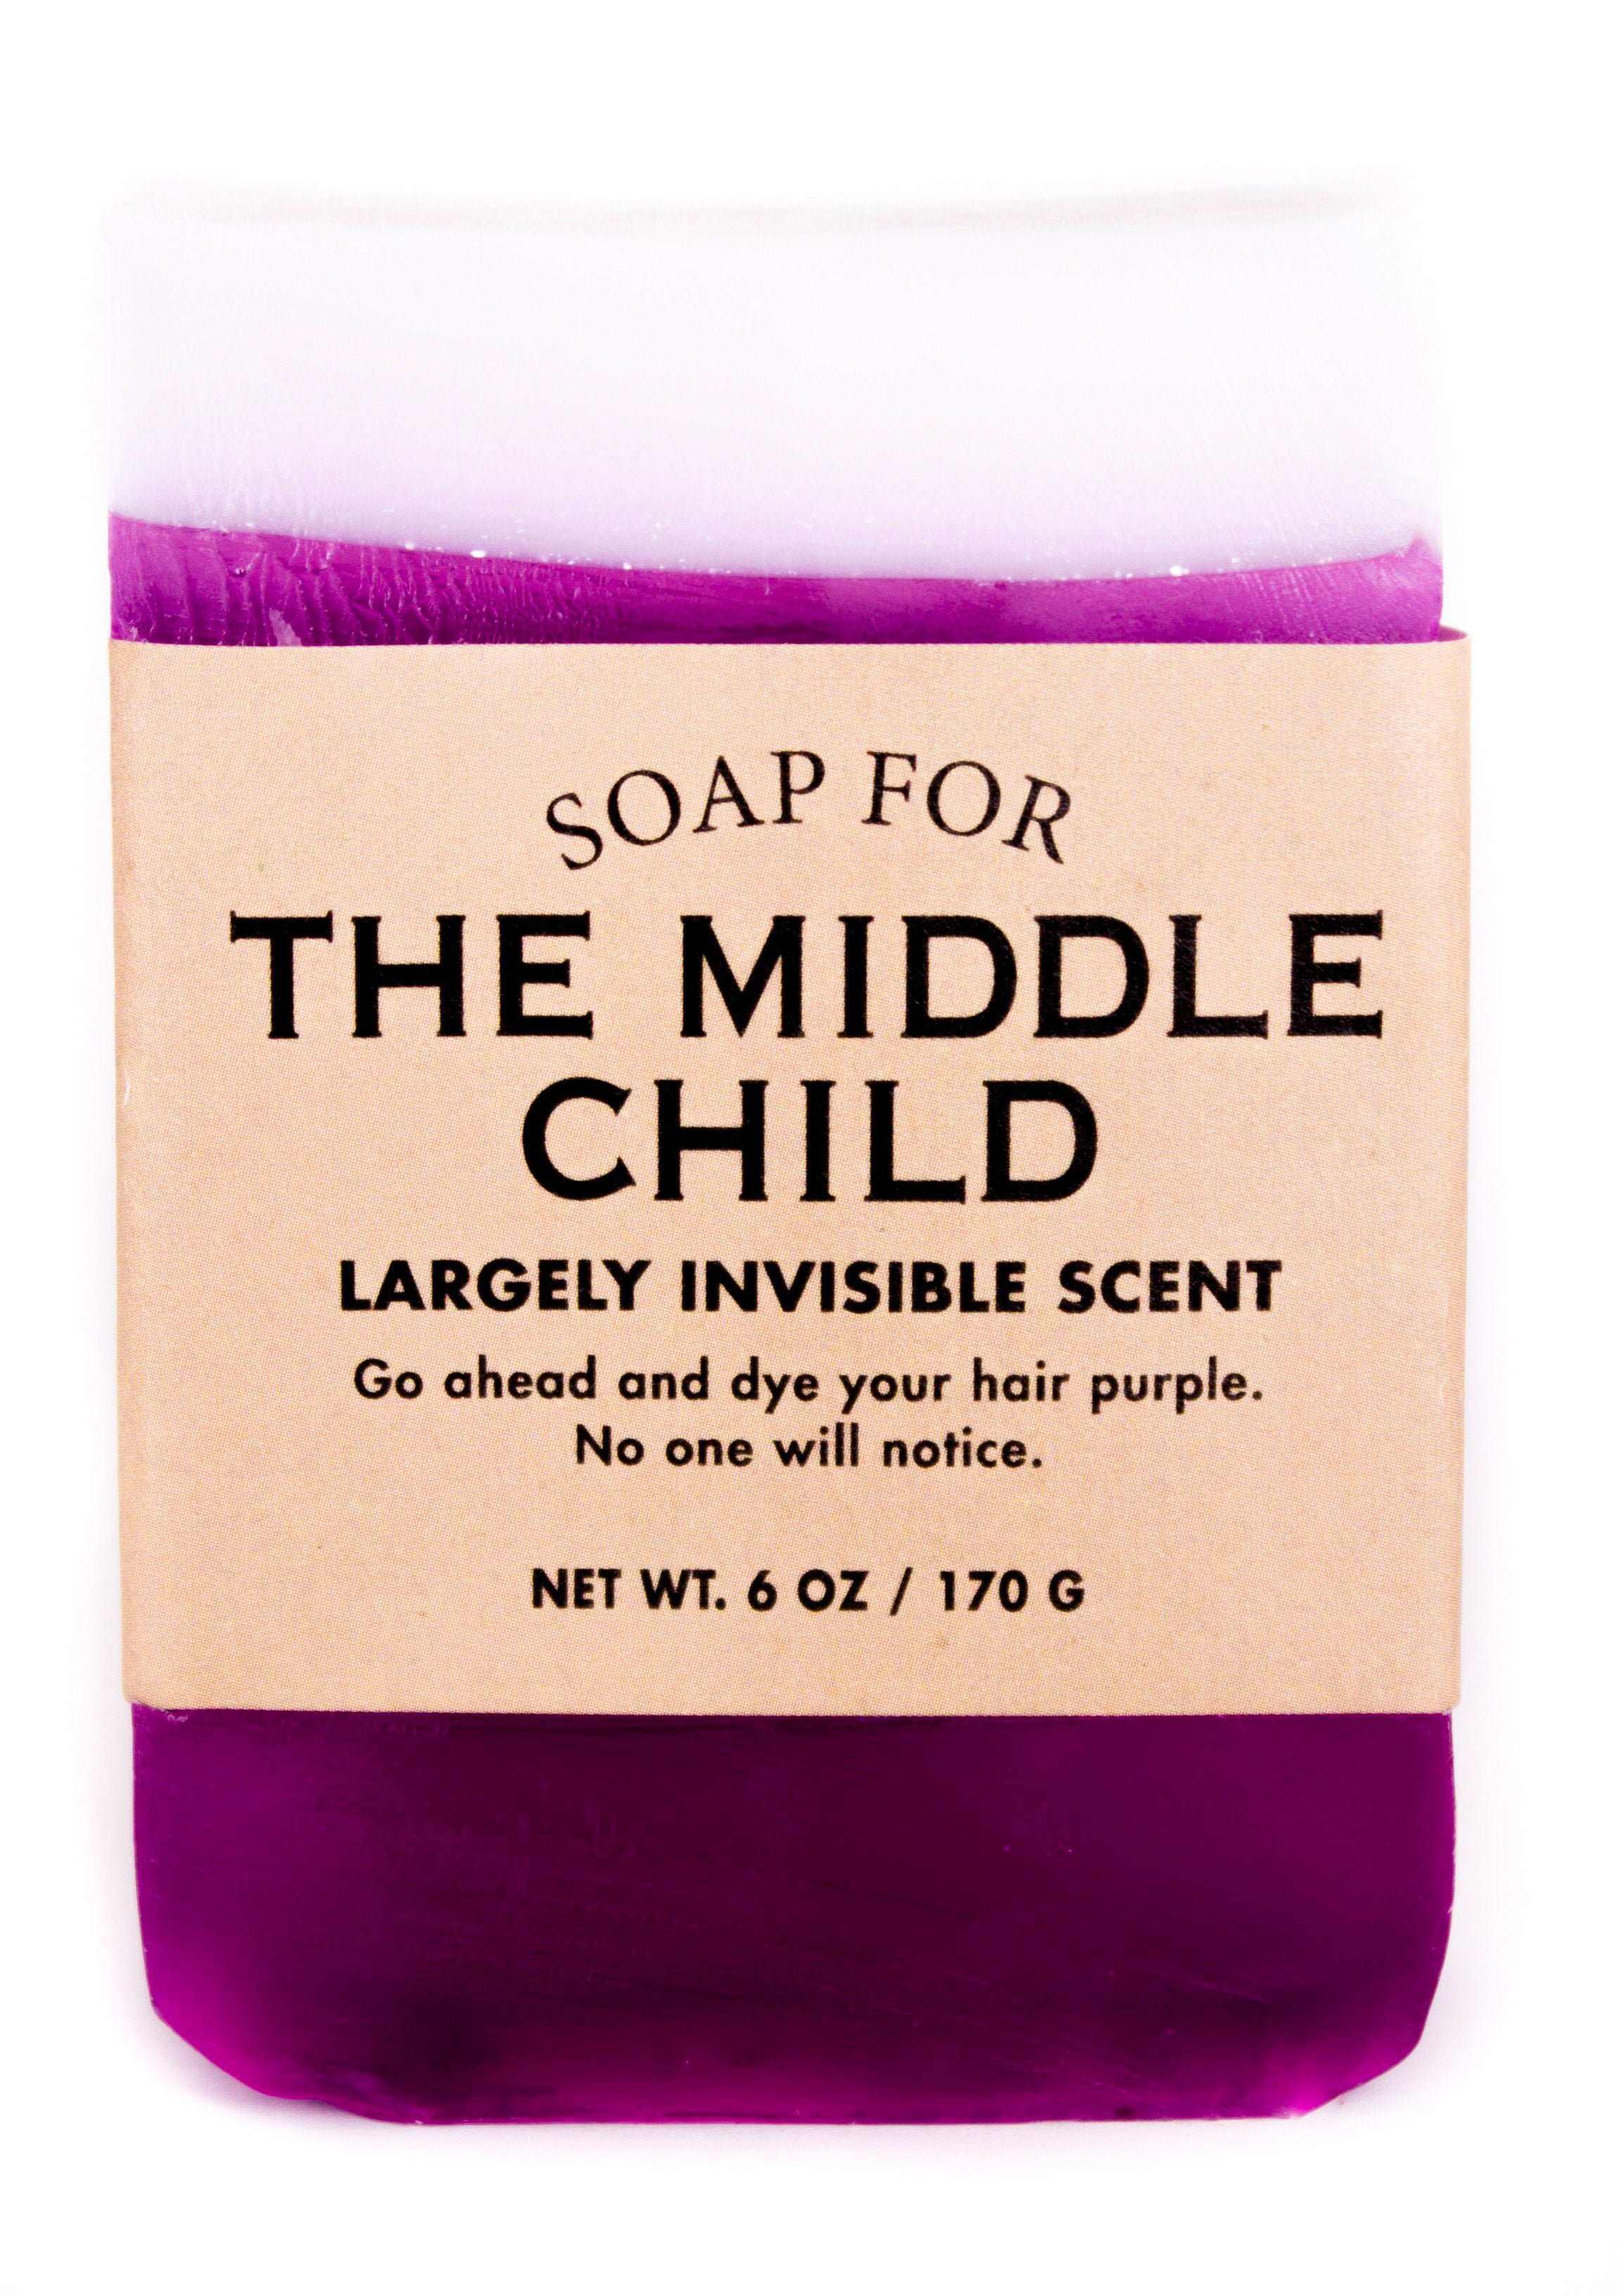 Soap for The Middle Child – Whiskey Co.